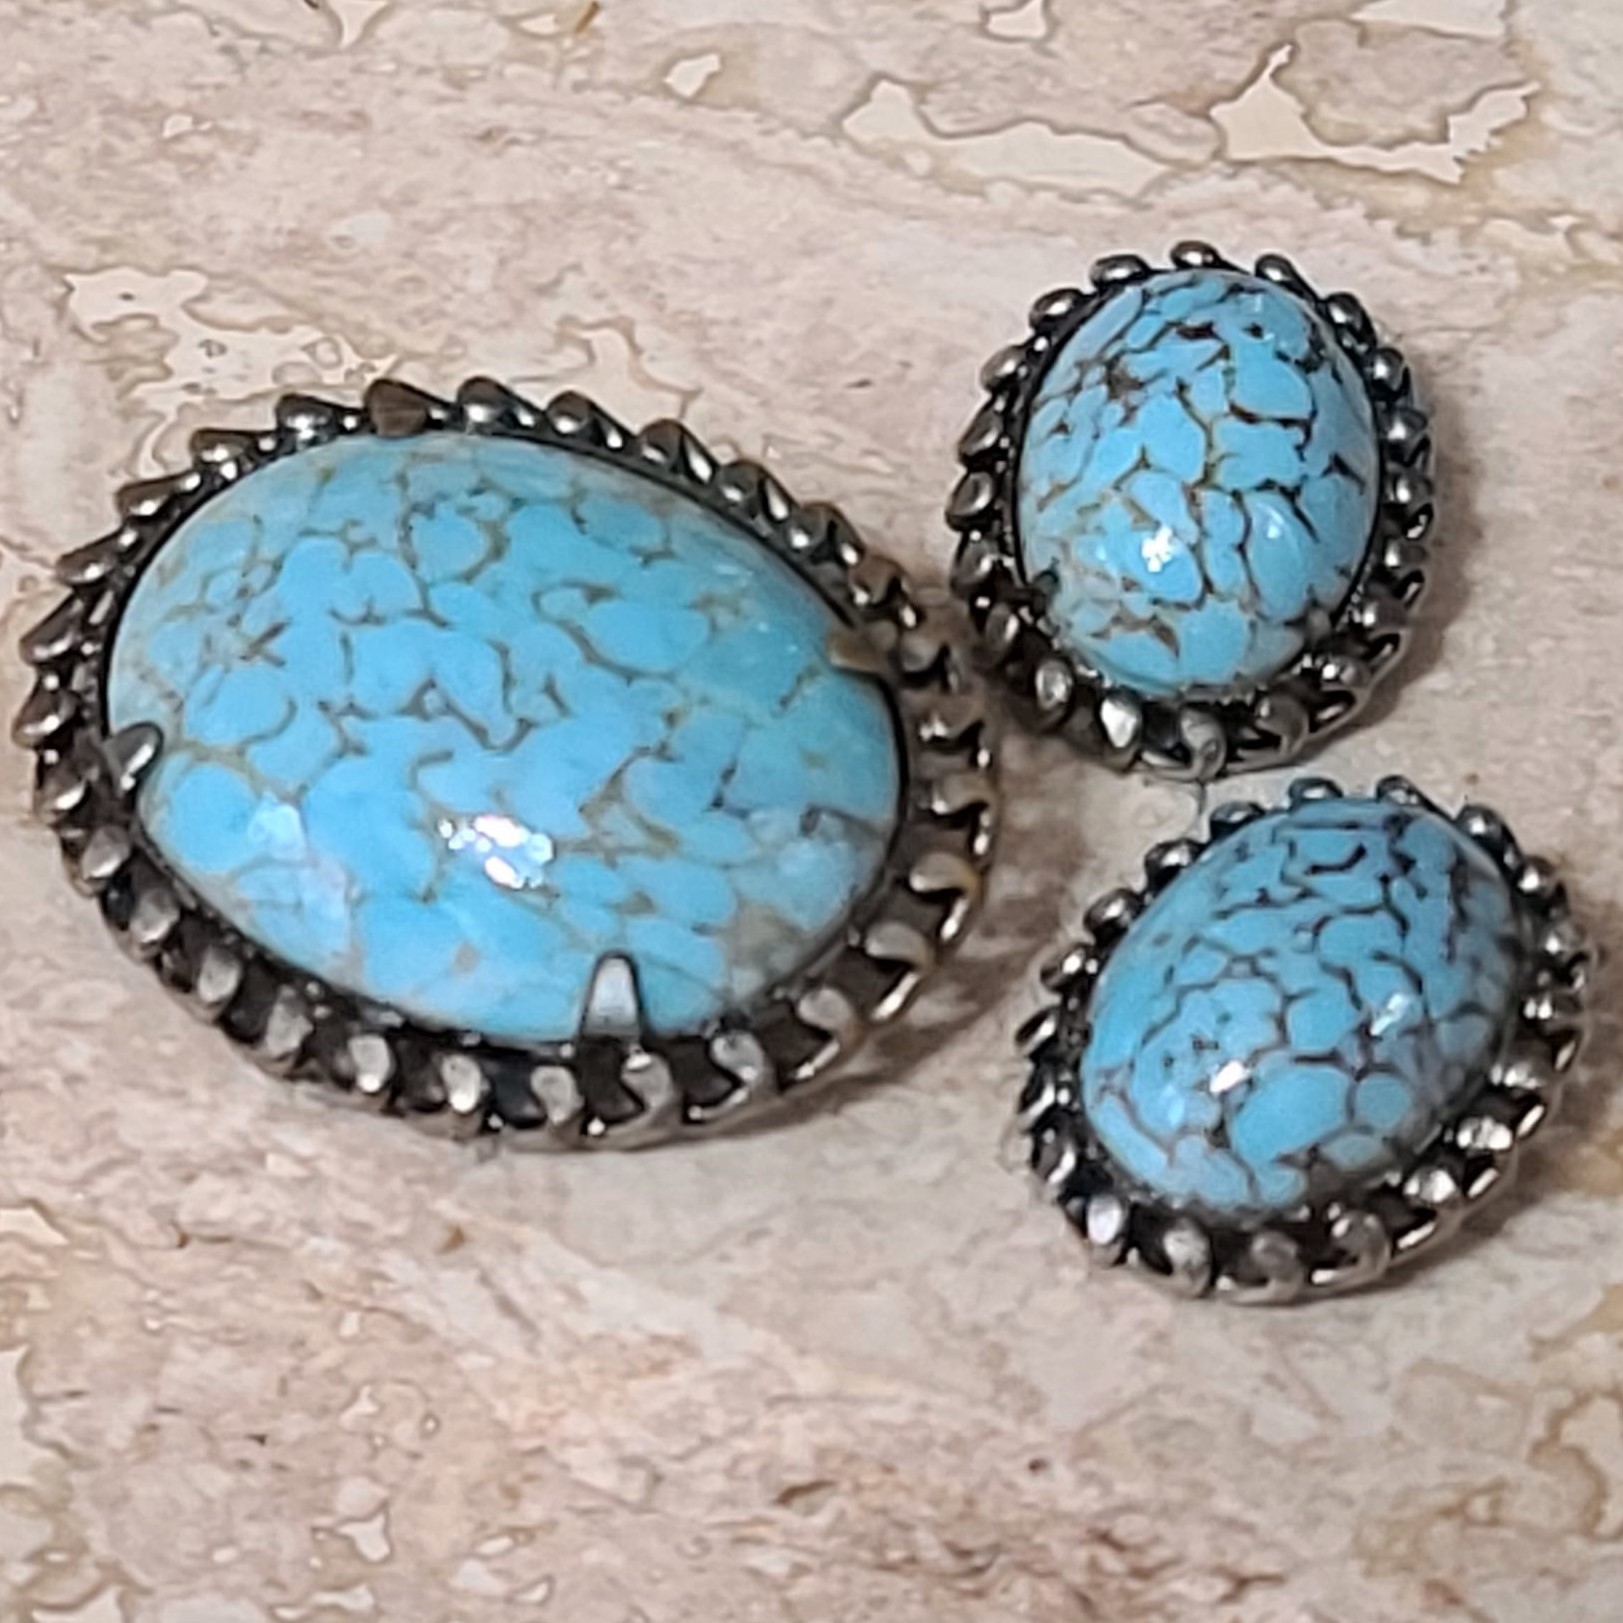 Robins egg glass turquoise pin and matched earrings clip on